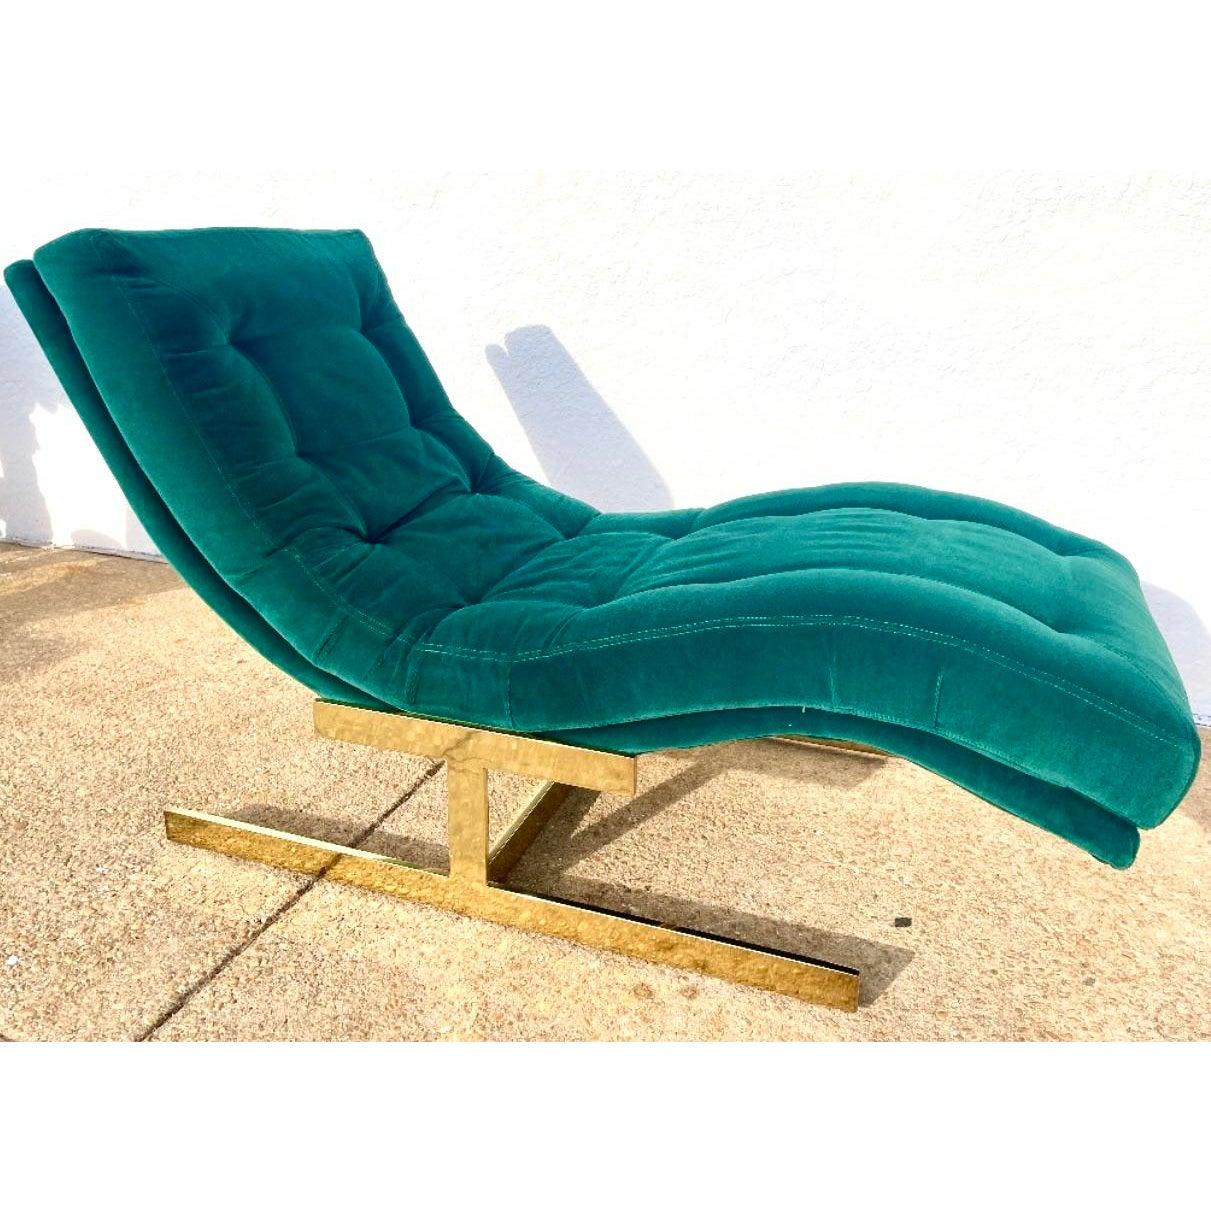 North American Midcentury Carson’s Wave Chaise Lounge After Milo Baughman